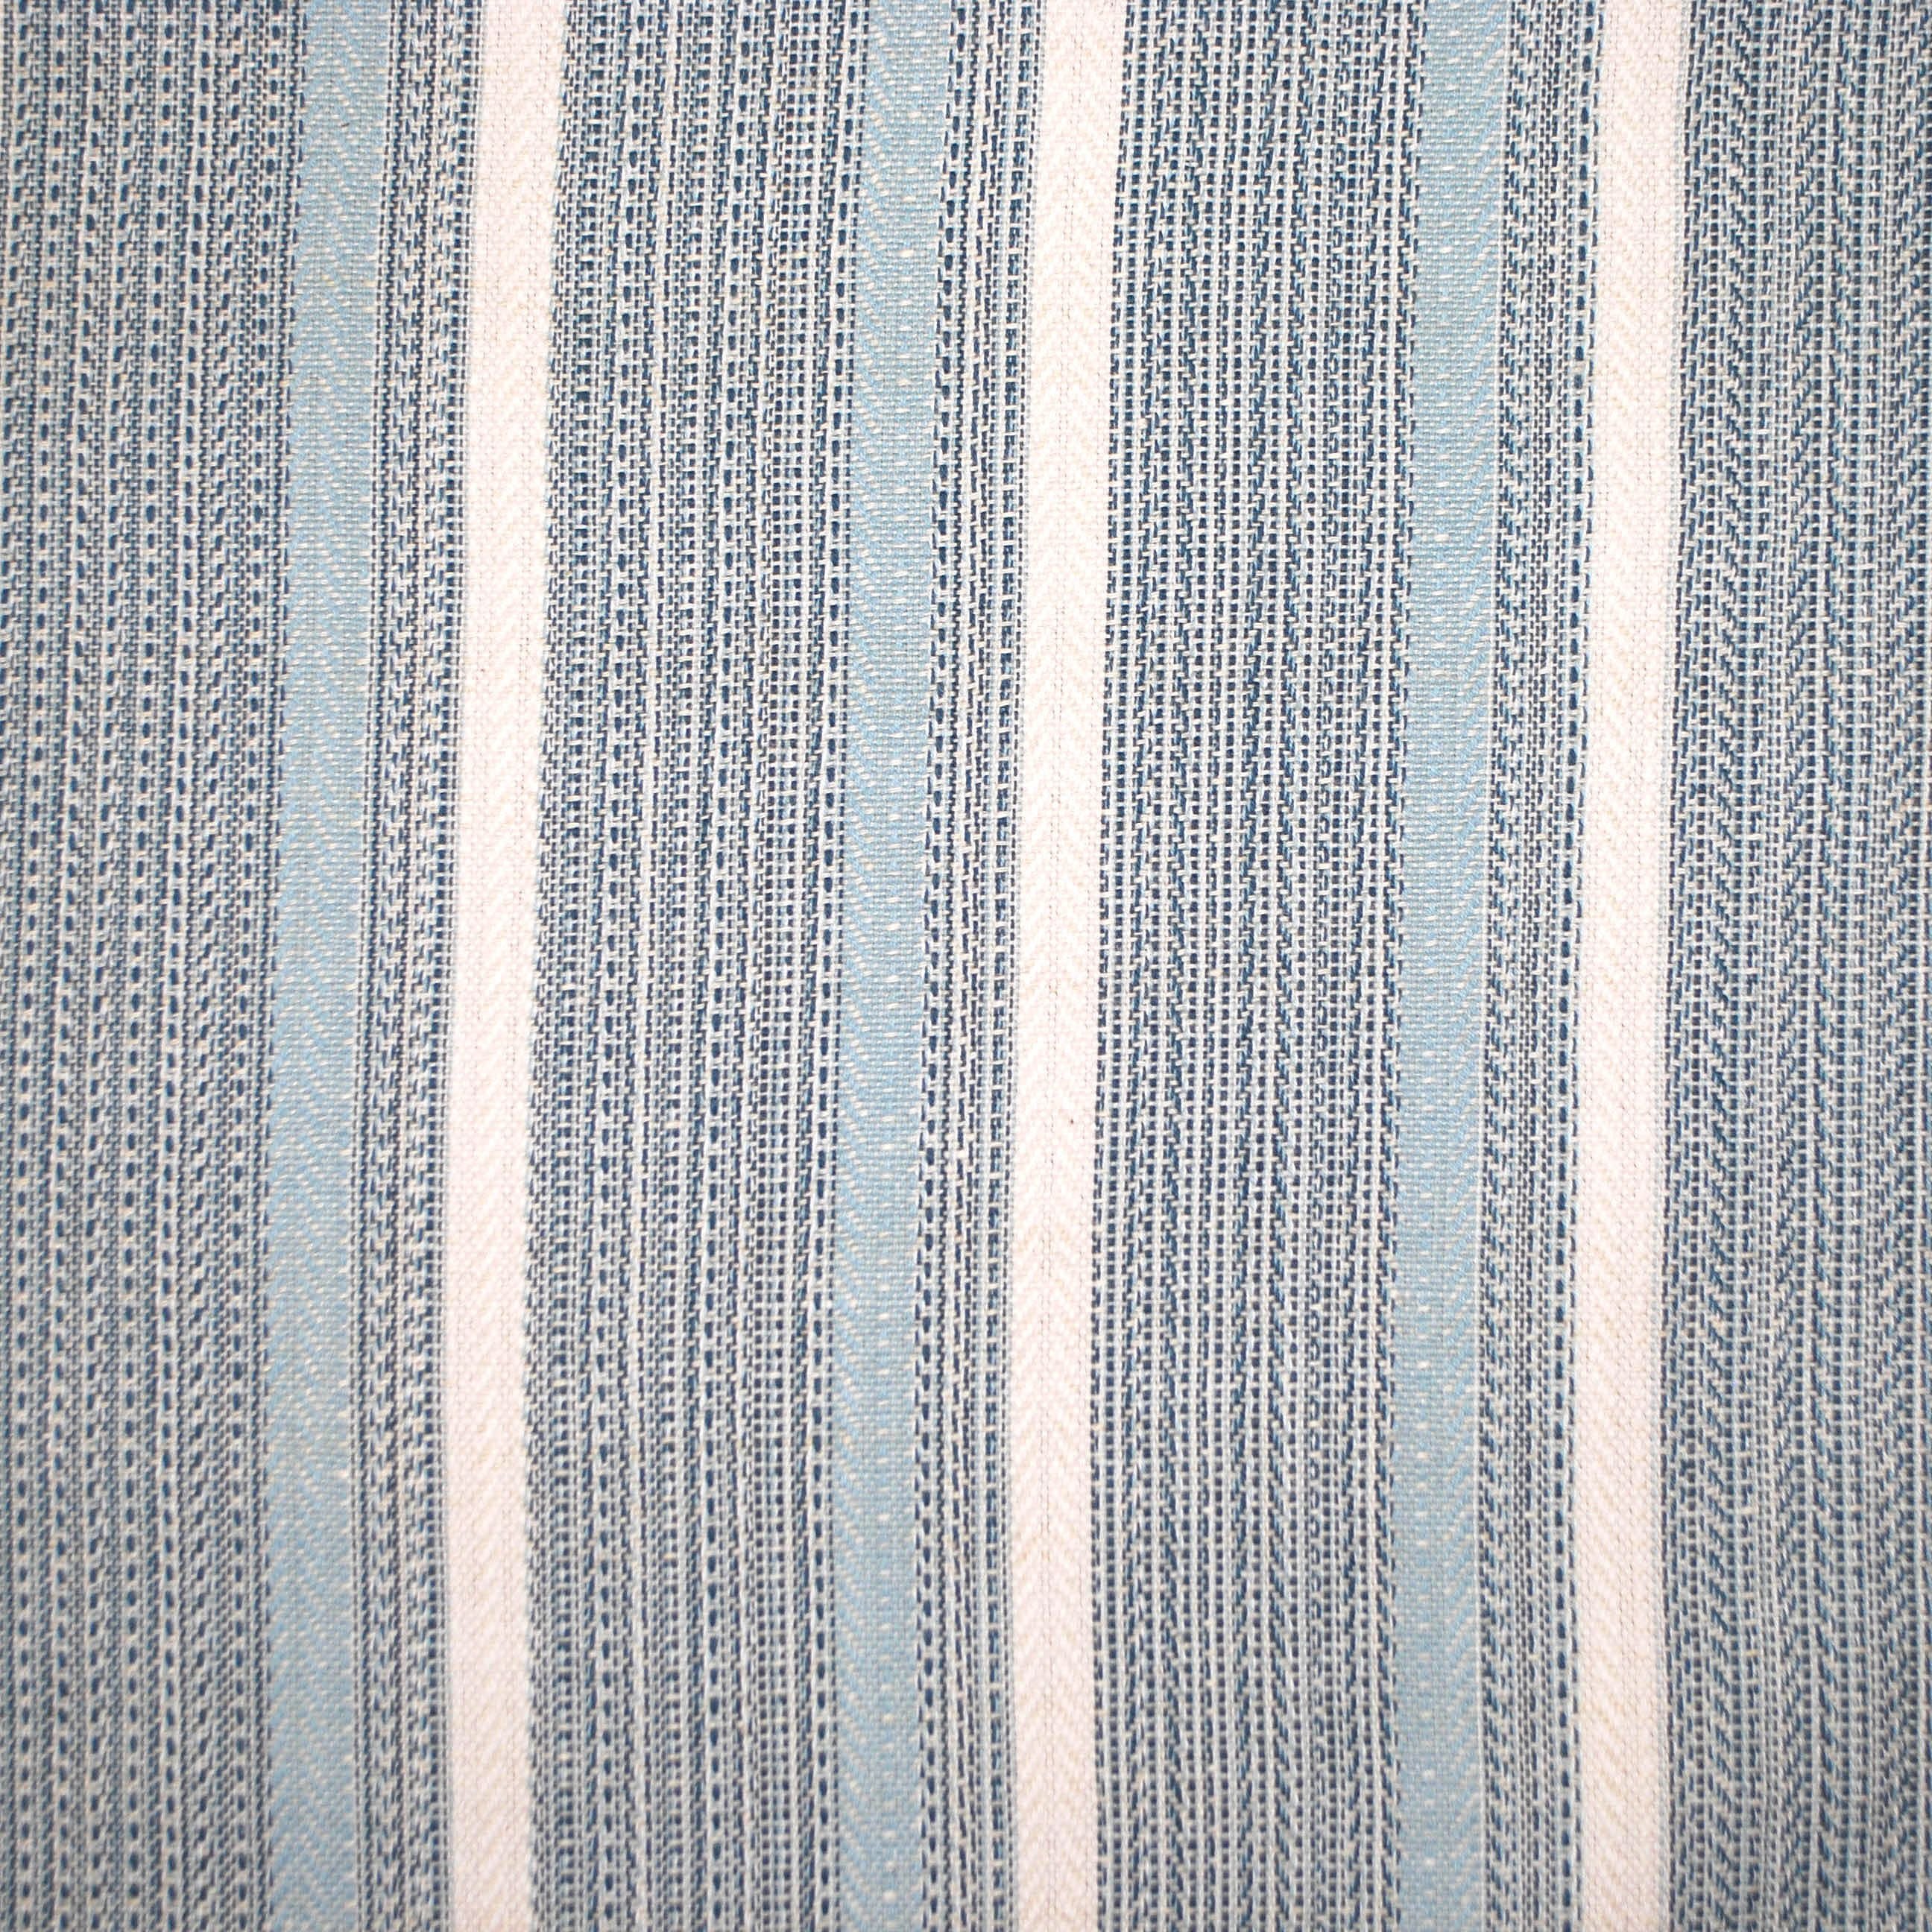 Winfield Hall fabric in bluebell color - pattern number PQ 0003A400 - by Scalamandre in the Old World Weavers collection